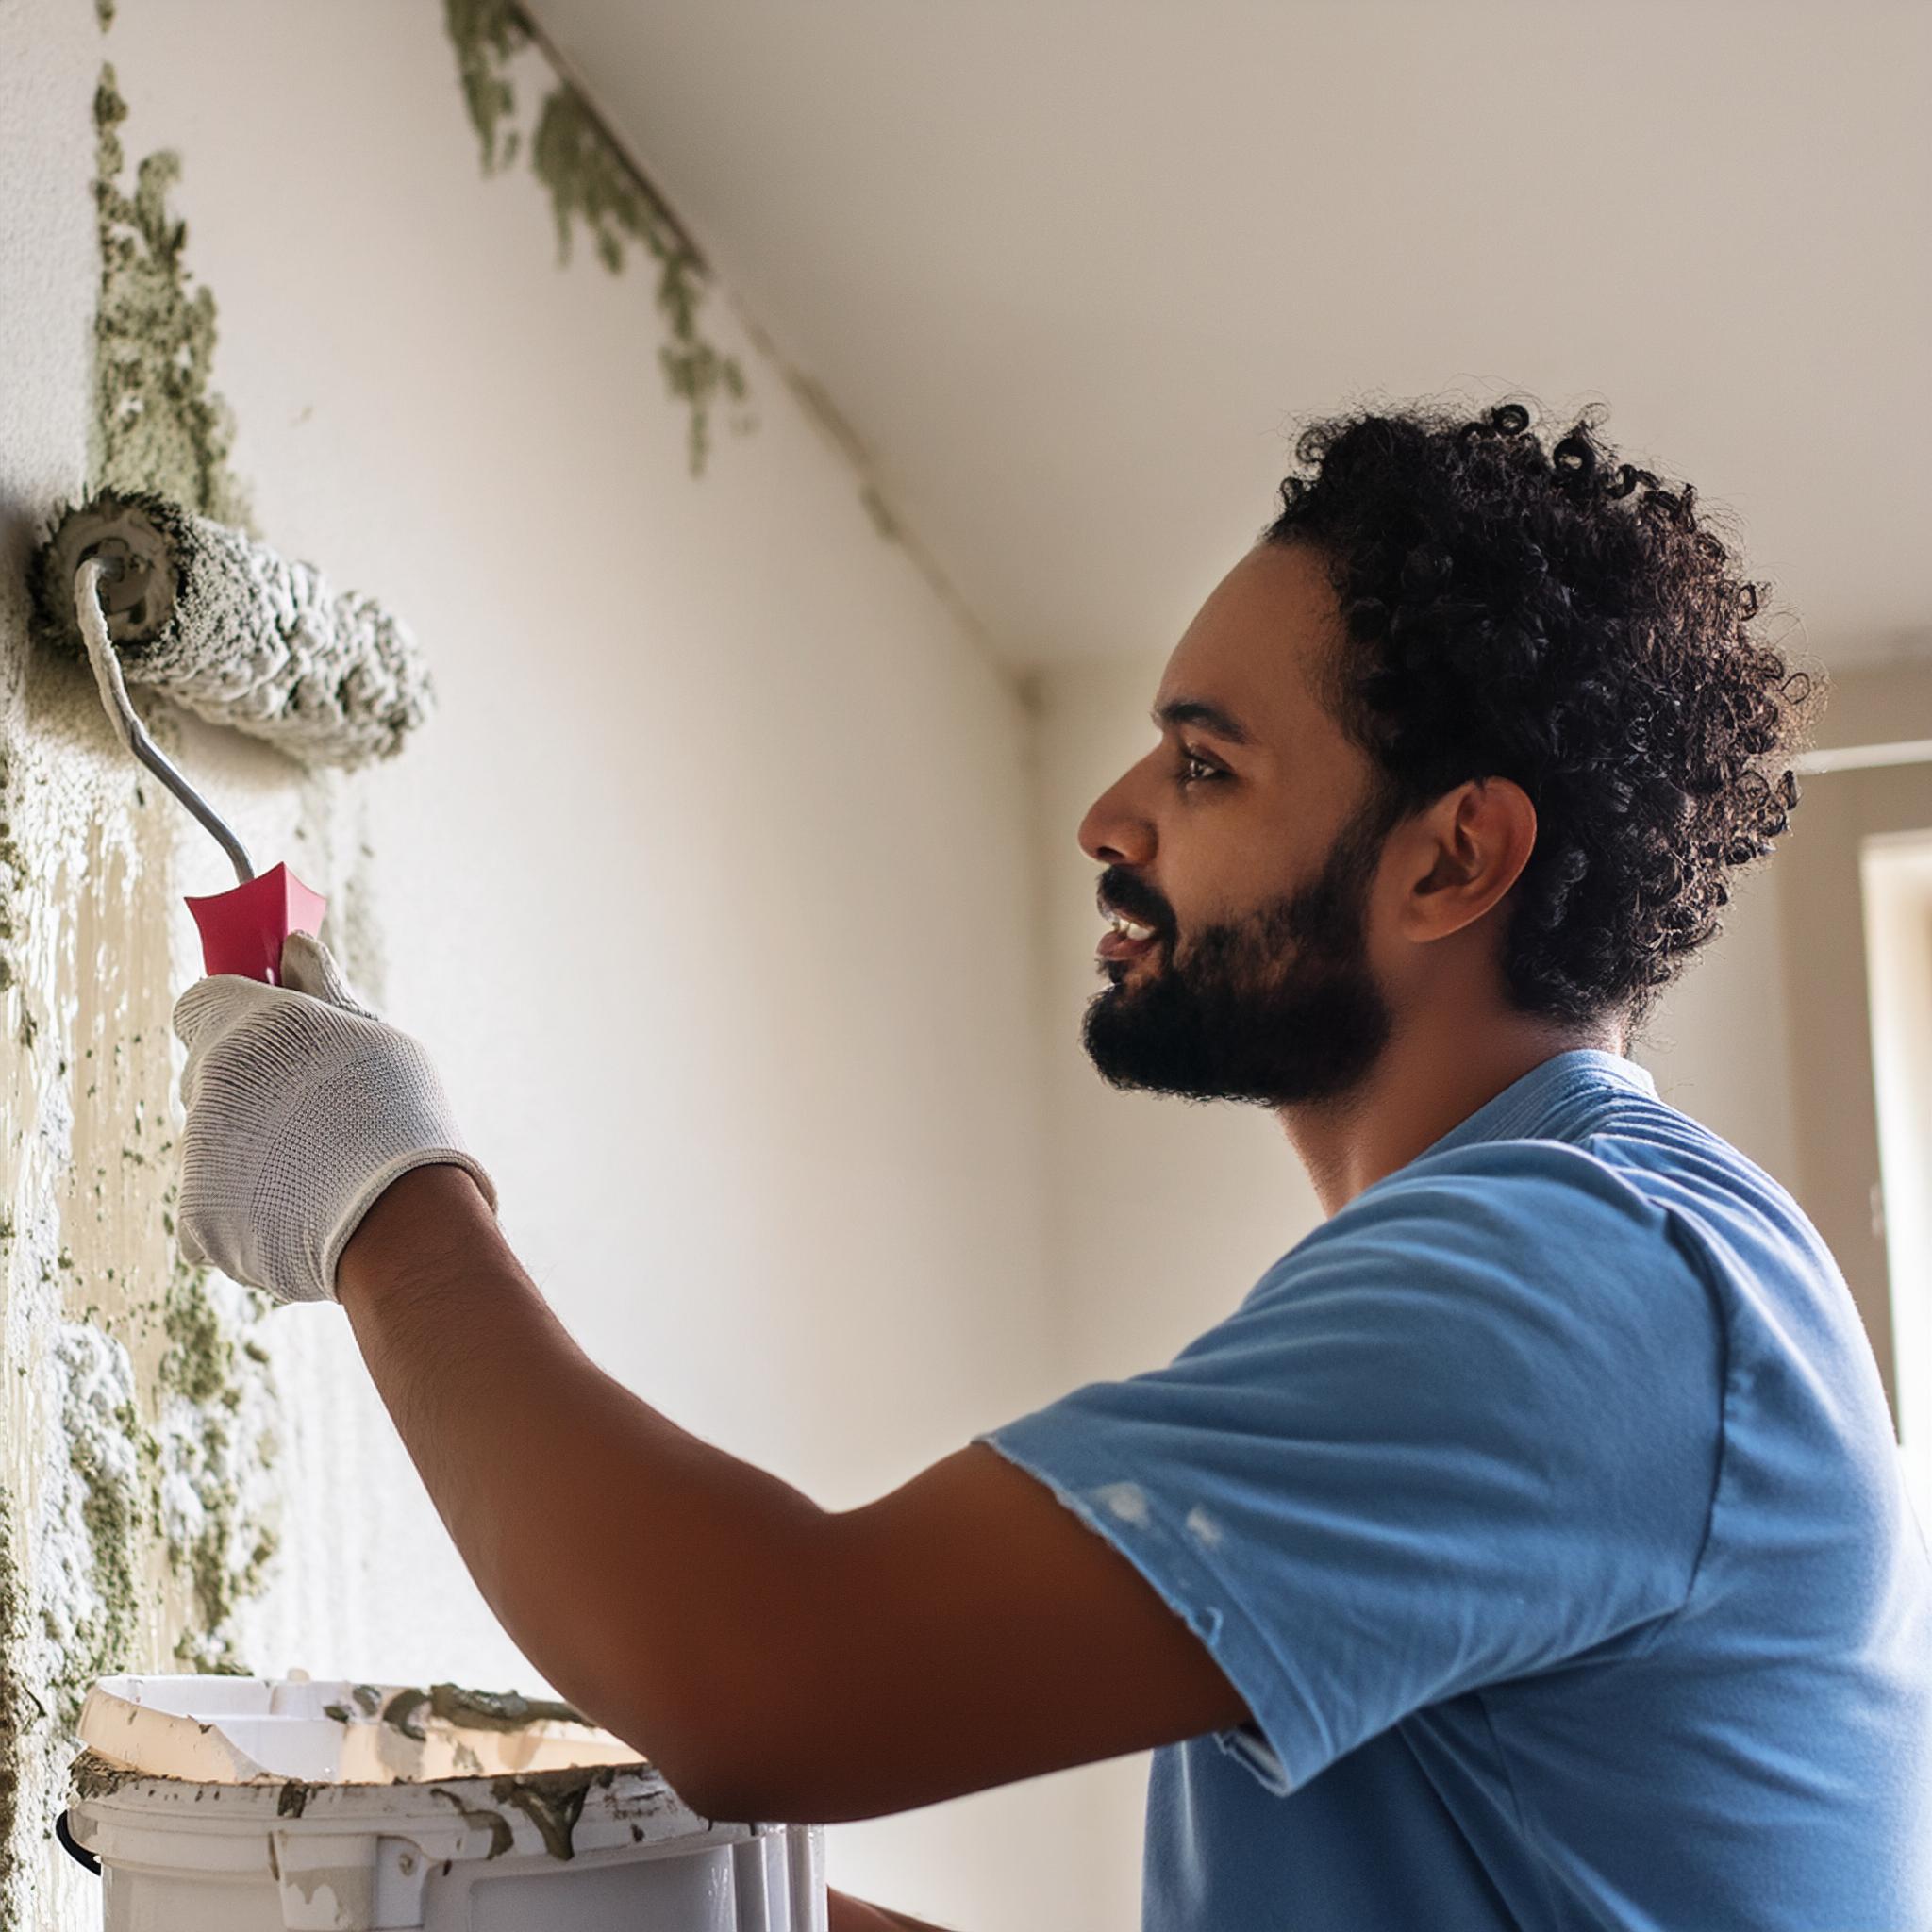 painter painting over mold on a wall inside a home with white paint